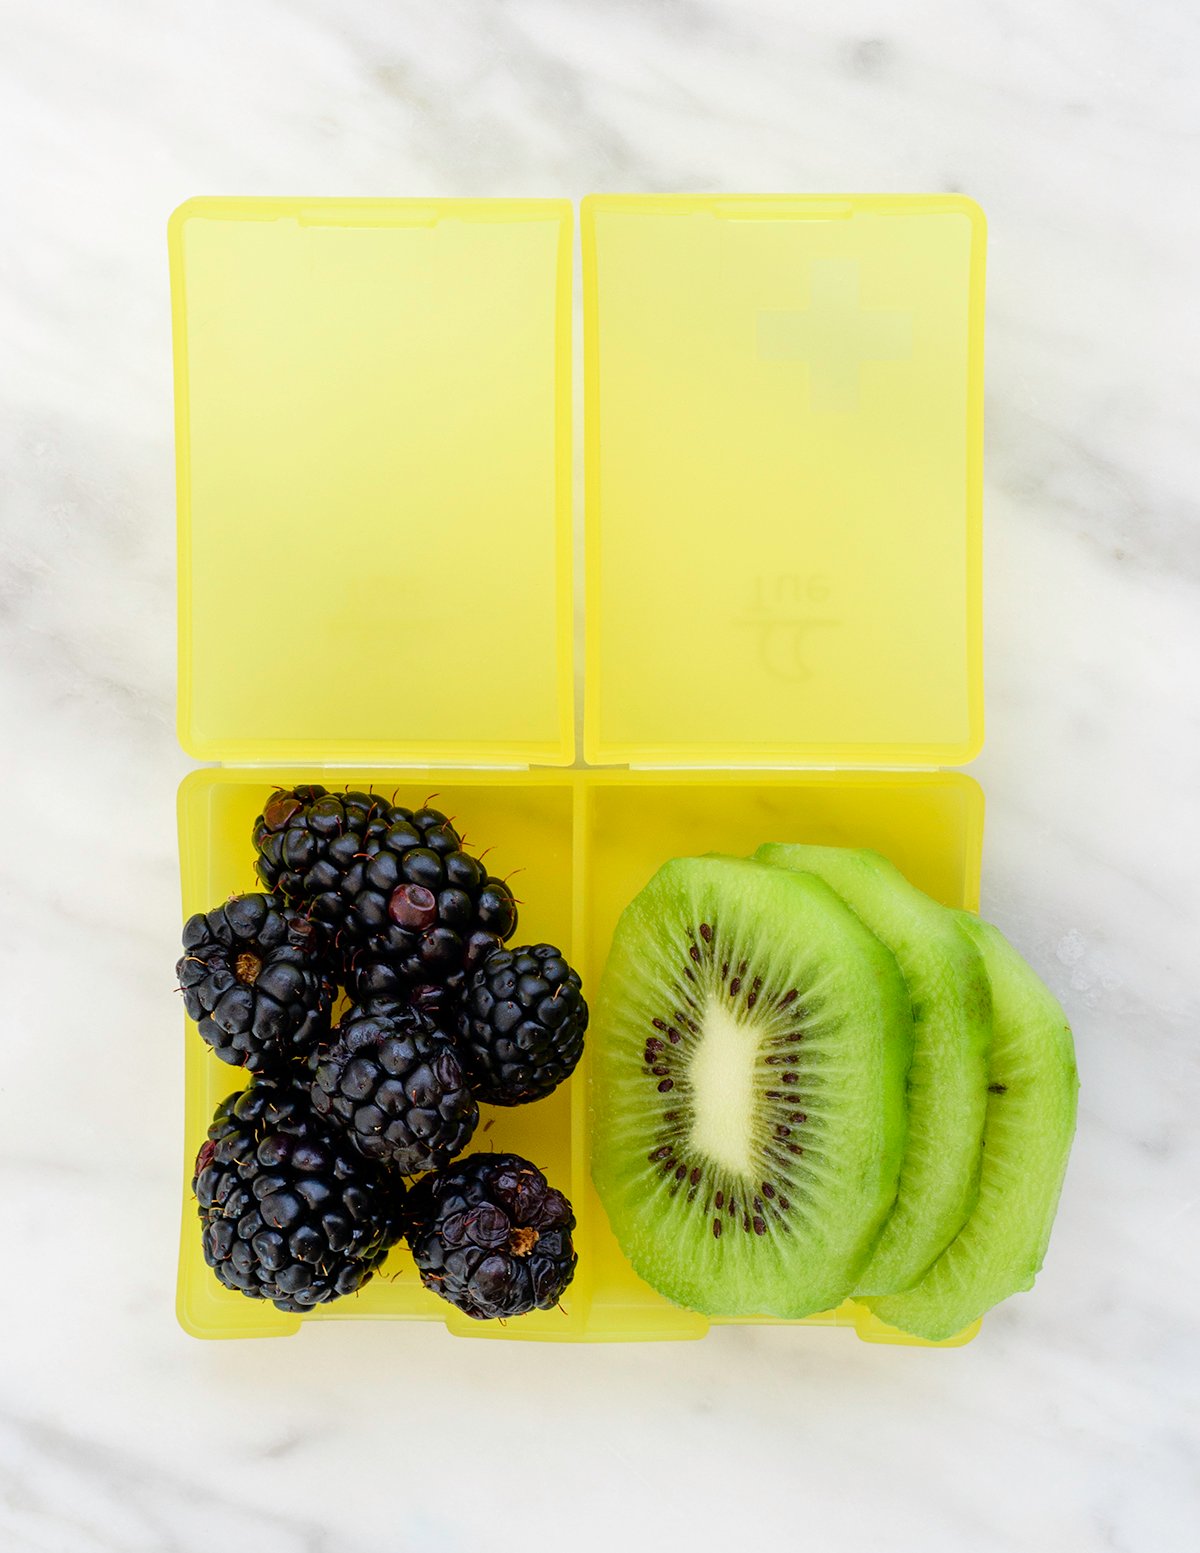 12 Essential Lunch Box Fruits from Weelicious.com